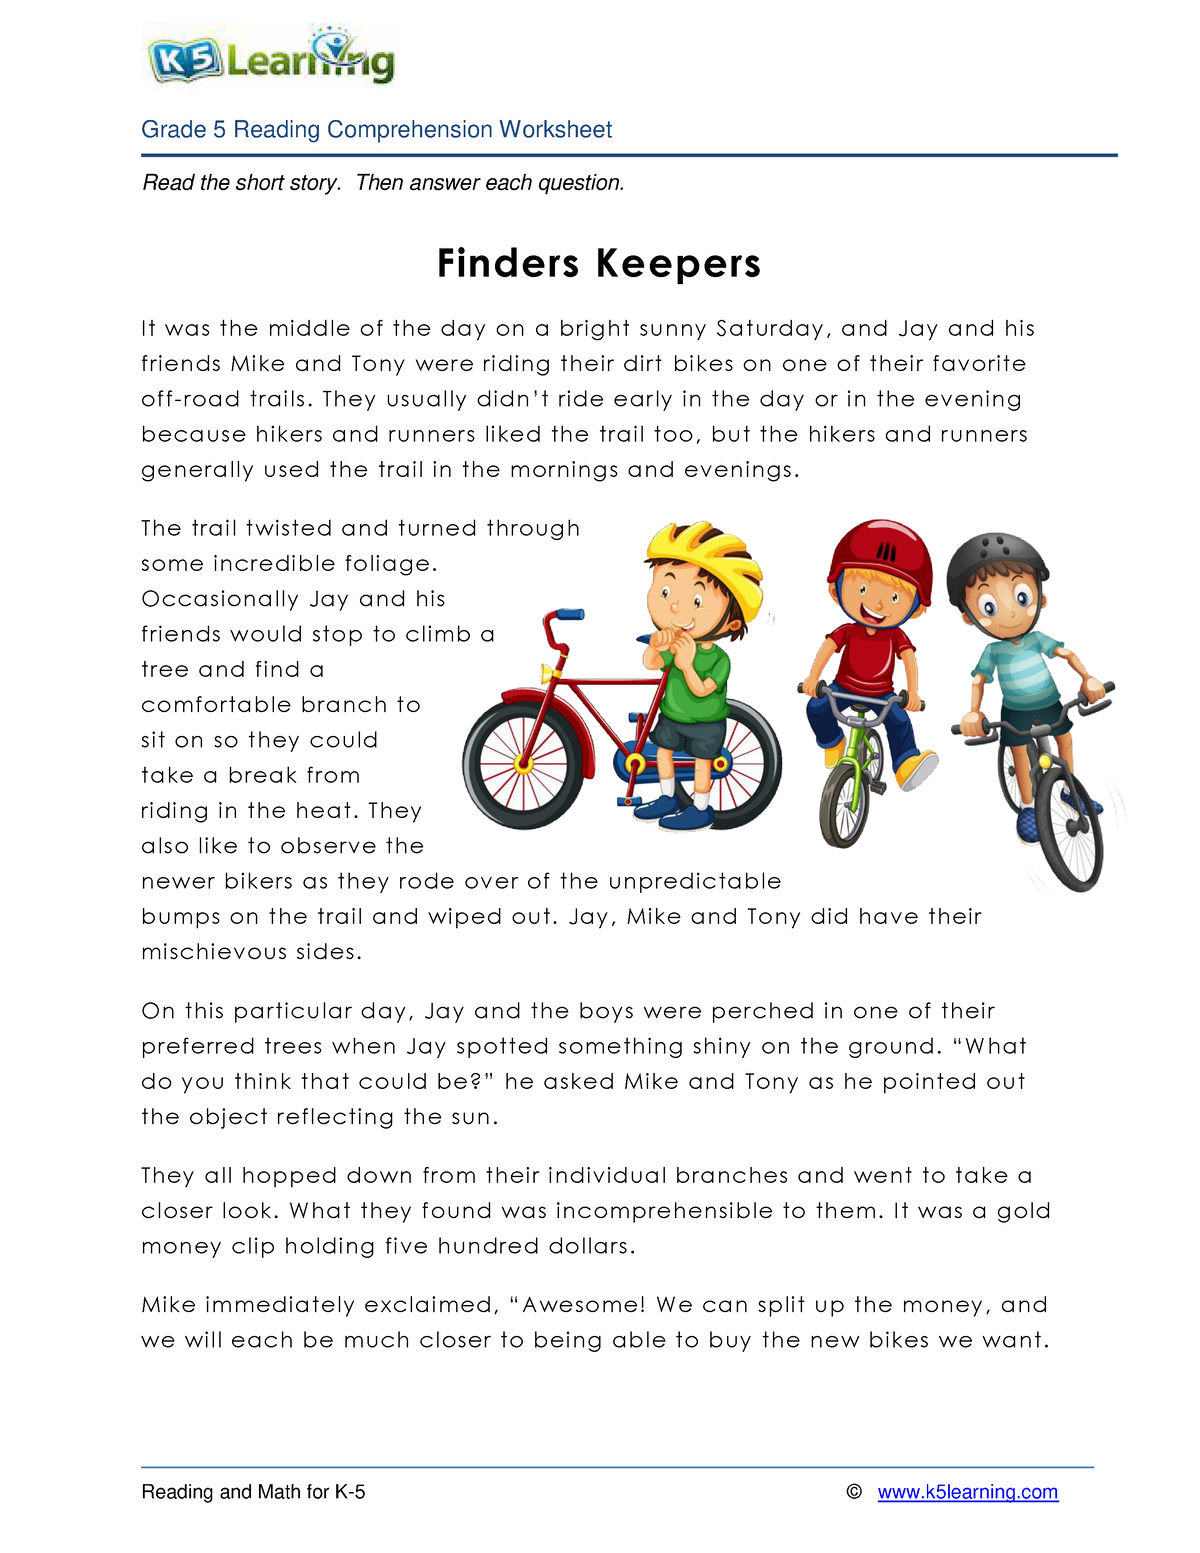 5th grade 5 reading finders - Read the short story. Then answer each ...